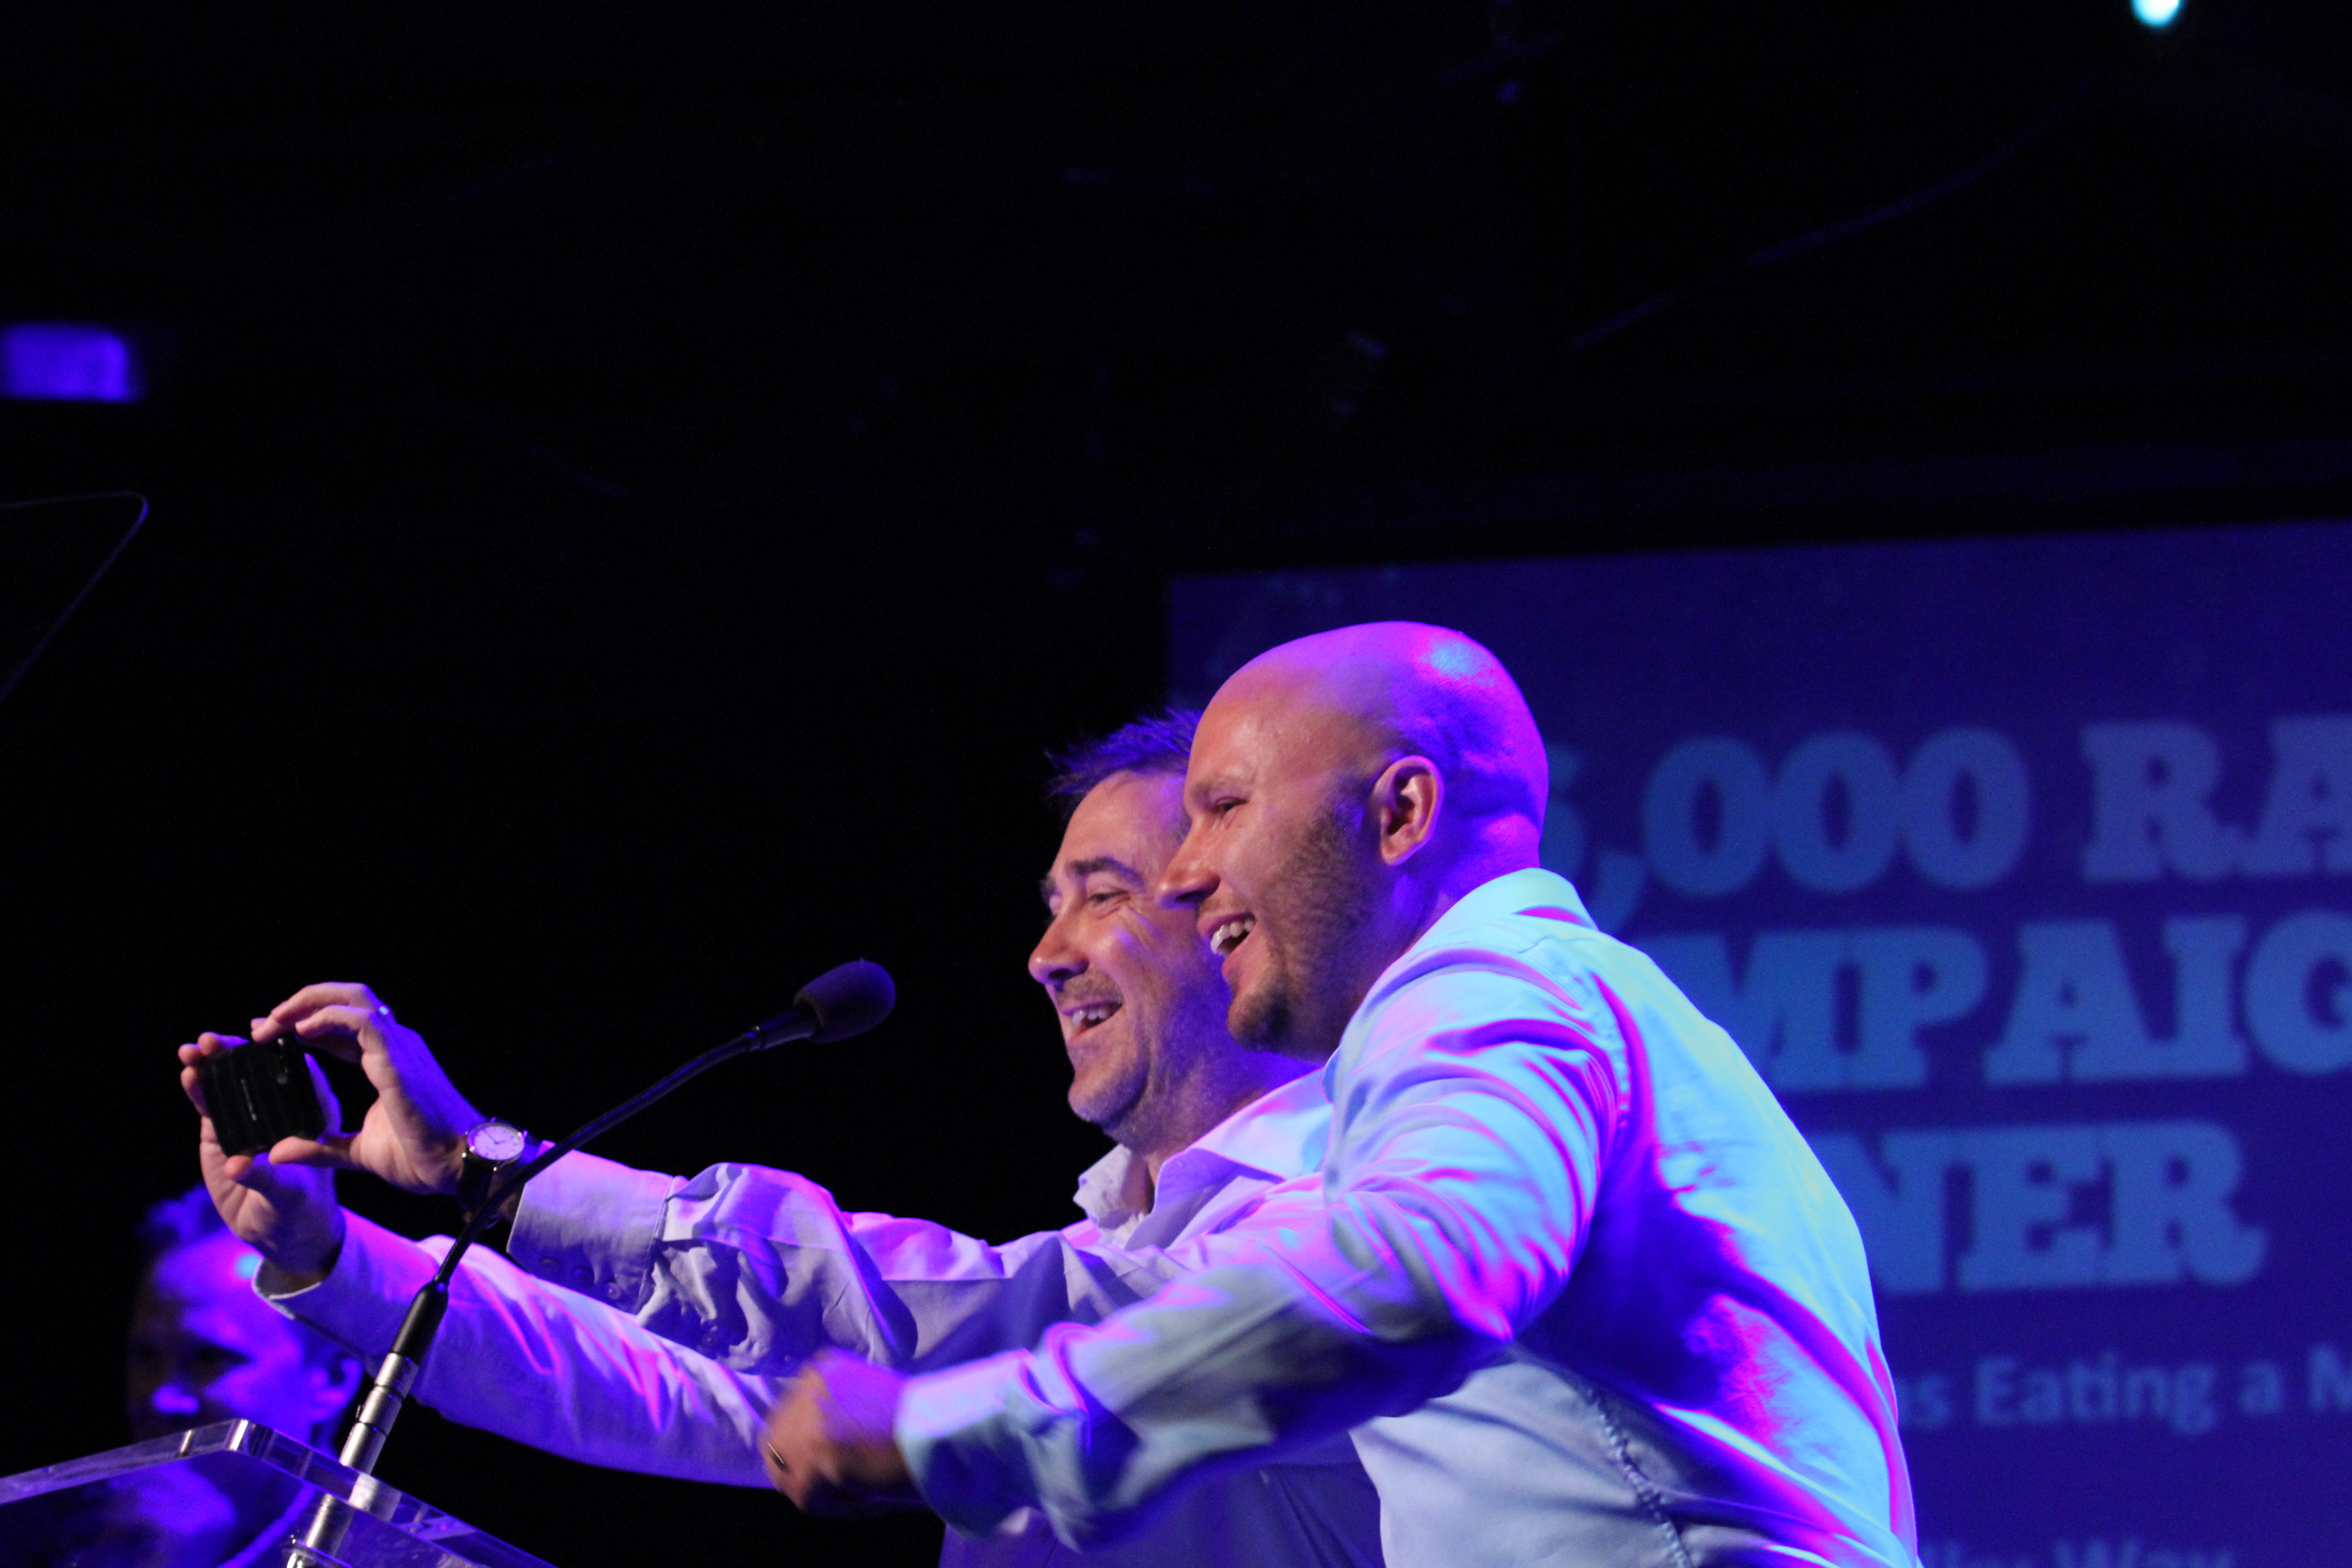 DDB Chicago's Wayne Robinson and Matt Collier, Campaign Winners Capturing the Moment